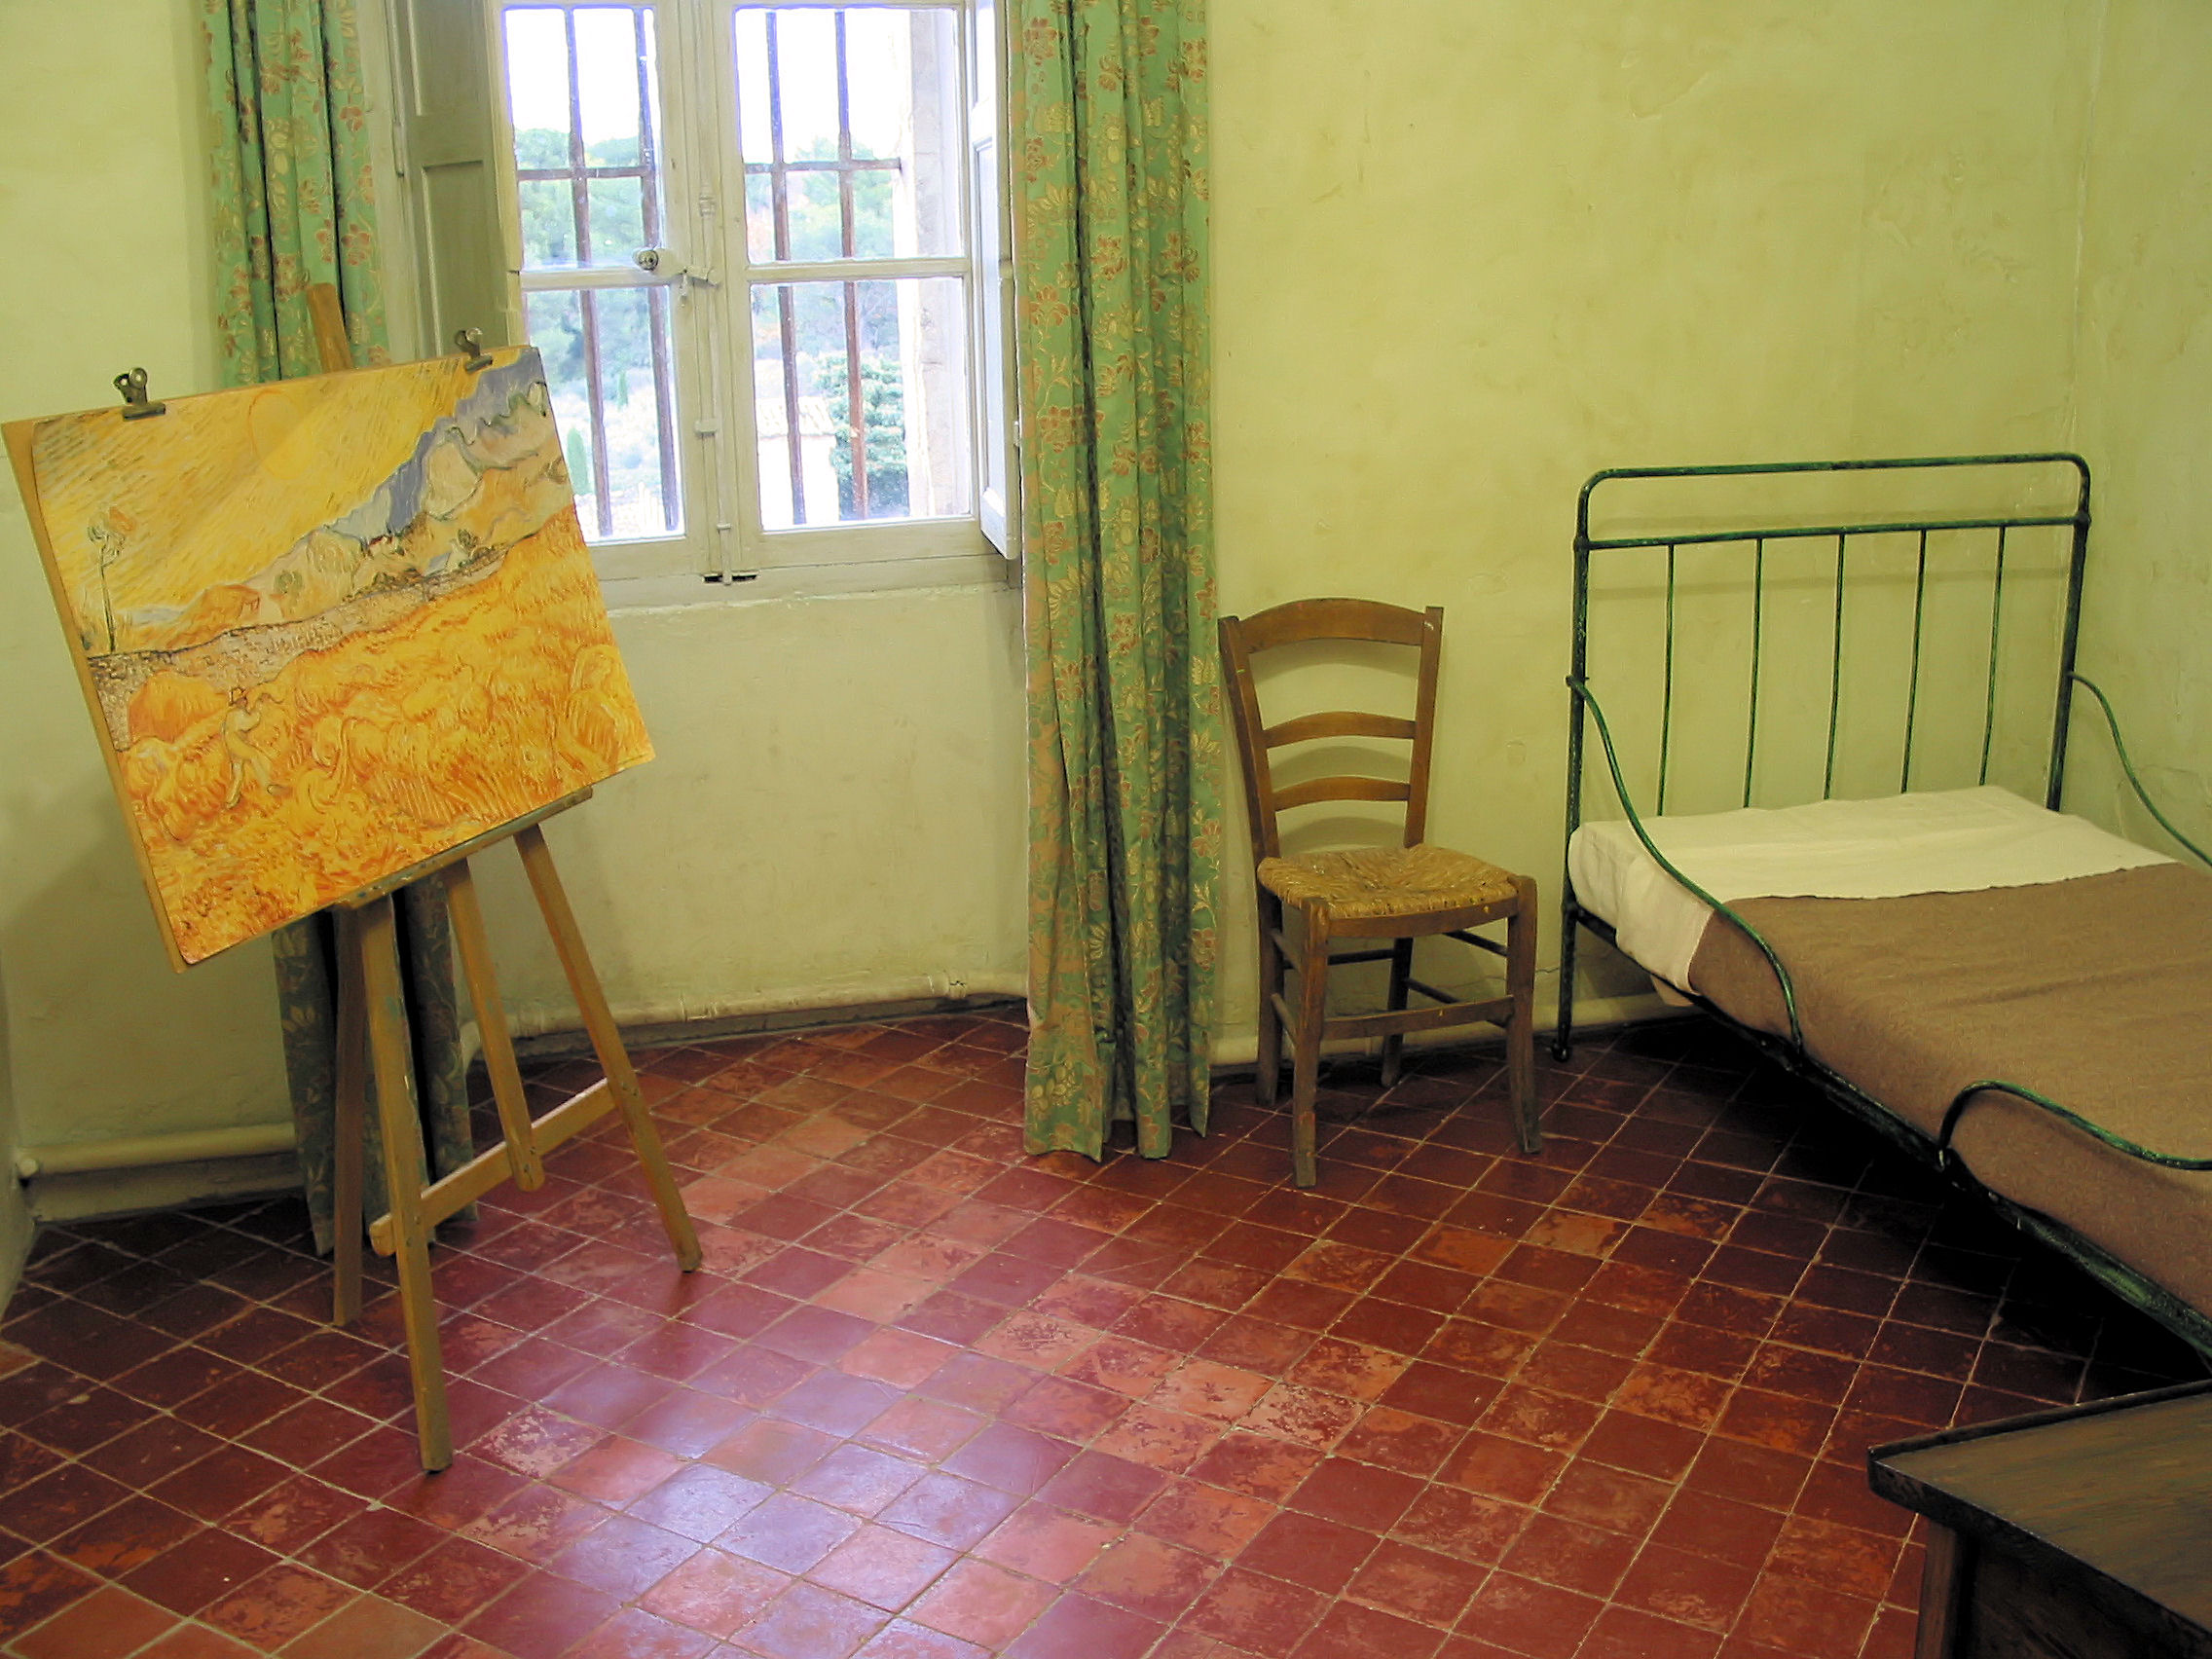 photograph of van gogh's bedchamber in the asylum, showing an easel on the left, a window in the center, and a bed on the right